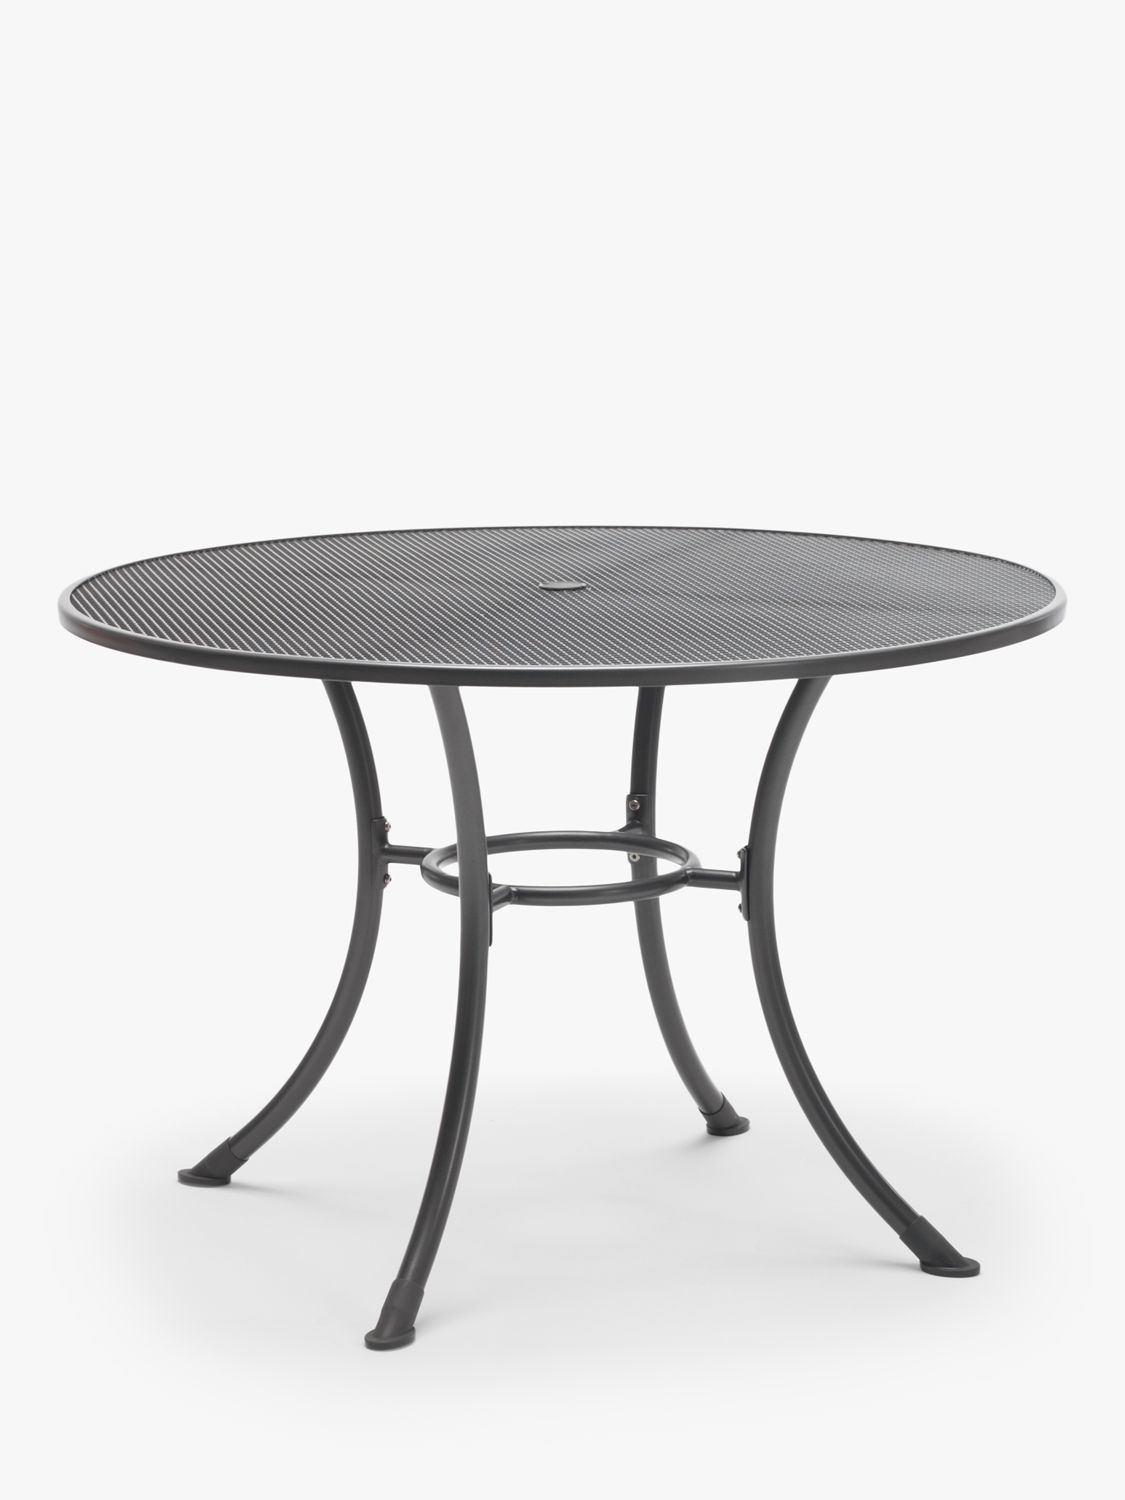 Photo of John lewis henley by kettler 6-seater round garden dining table iron grey